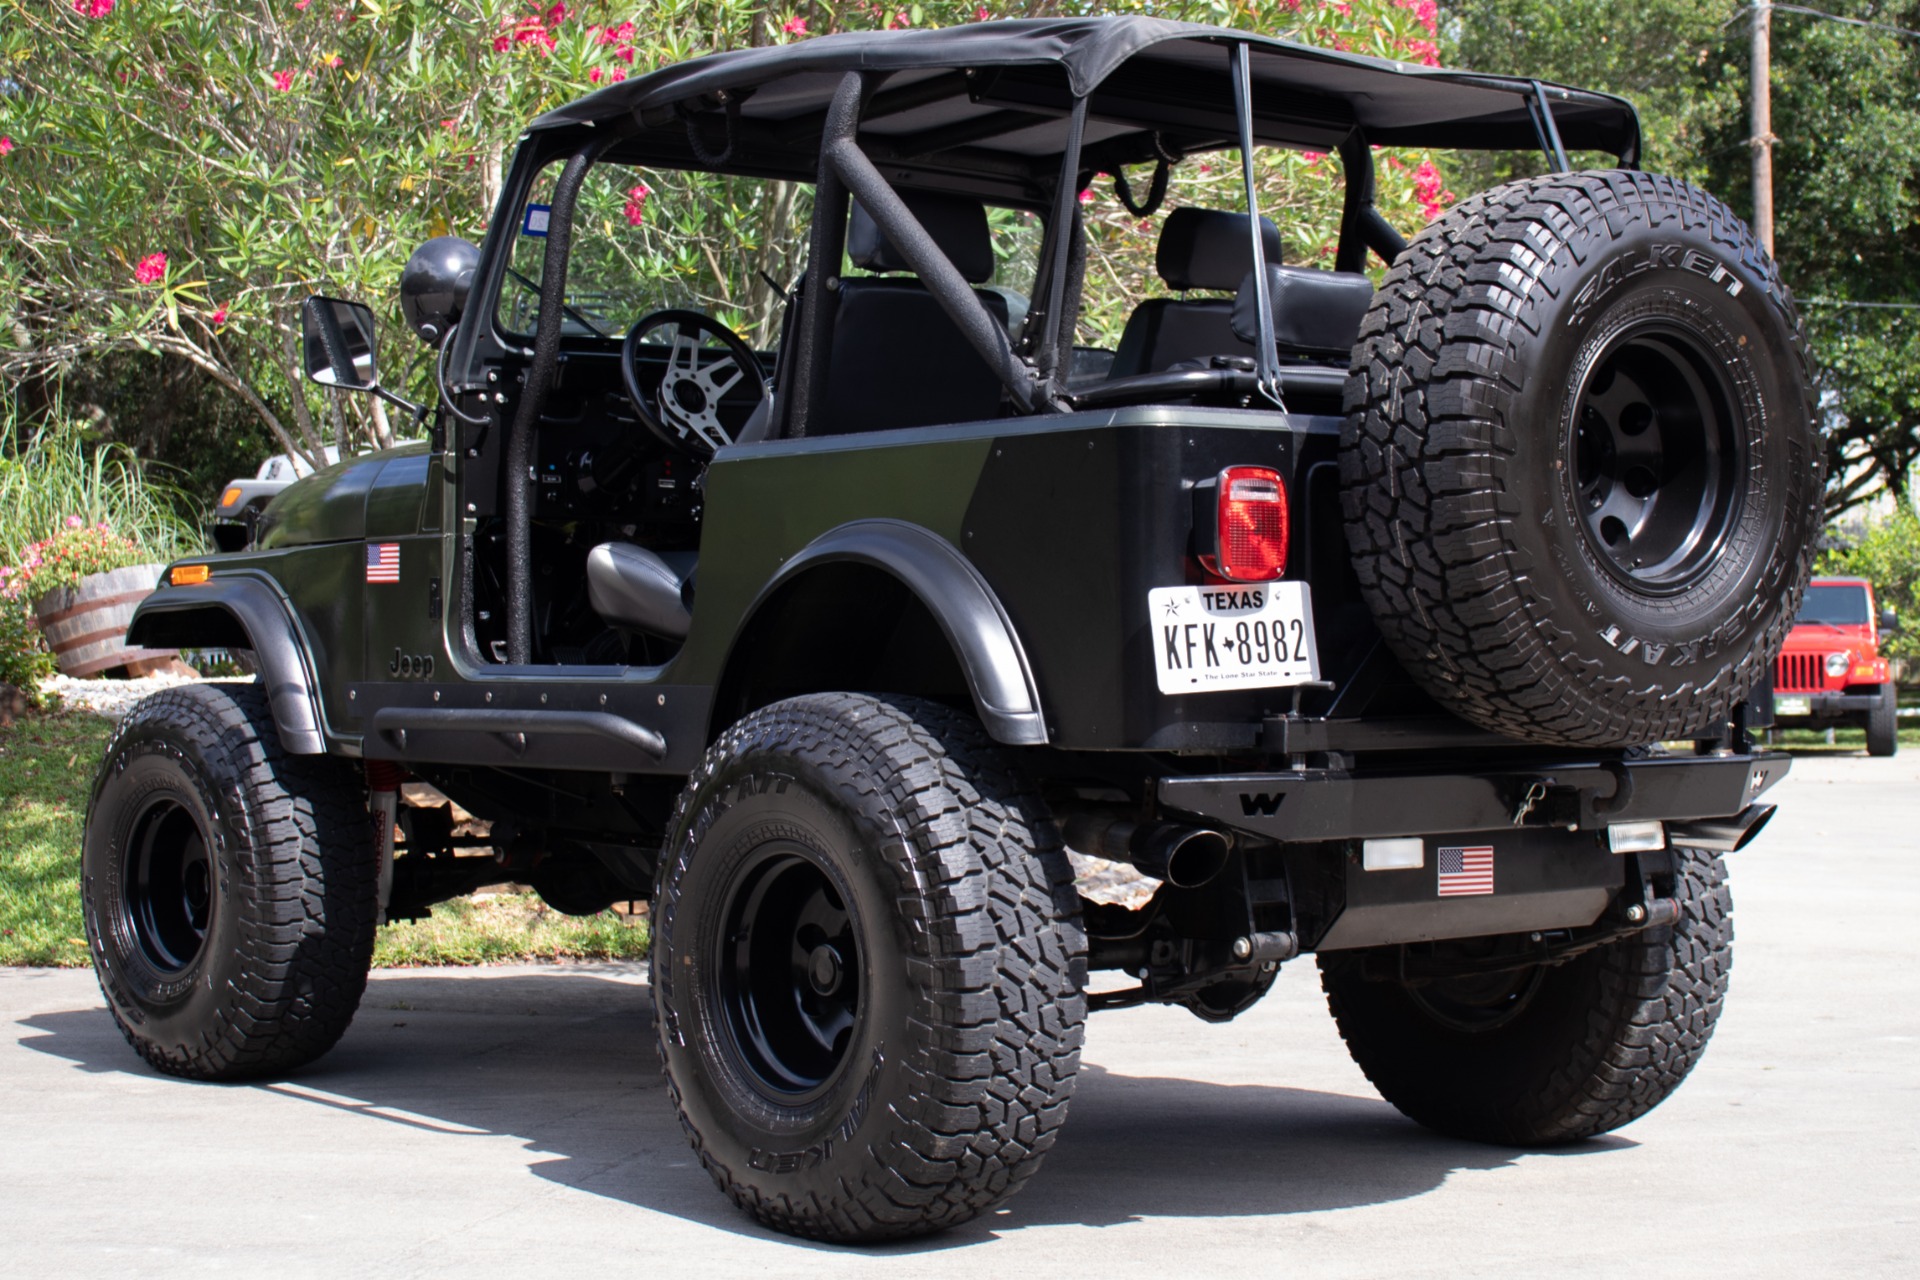 Used 1979 Jeep CJ7 For Sale ($22,995) | Select Jeeps Inc. Stock #139775